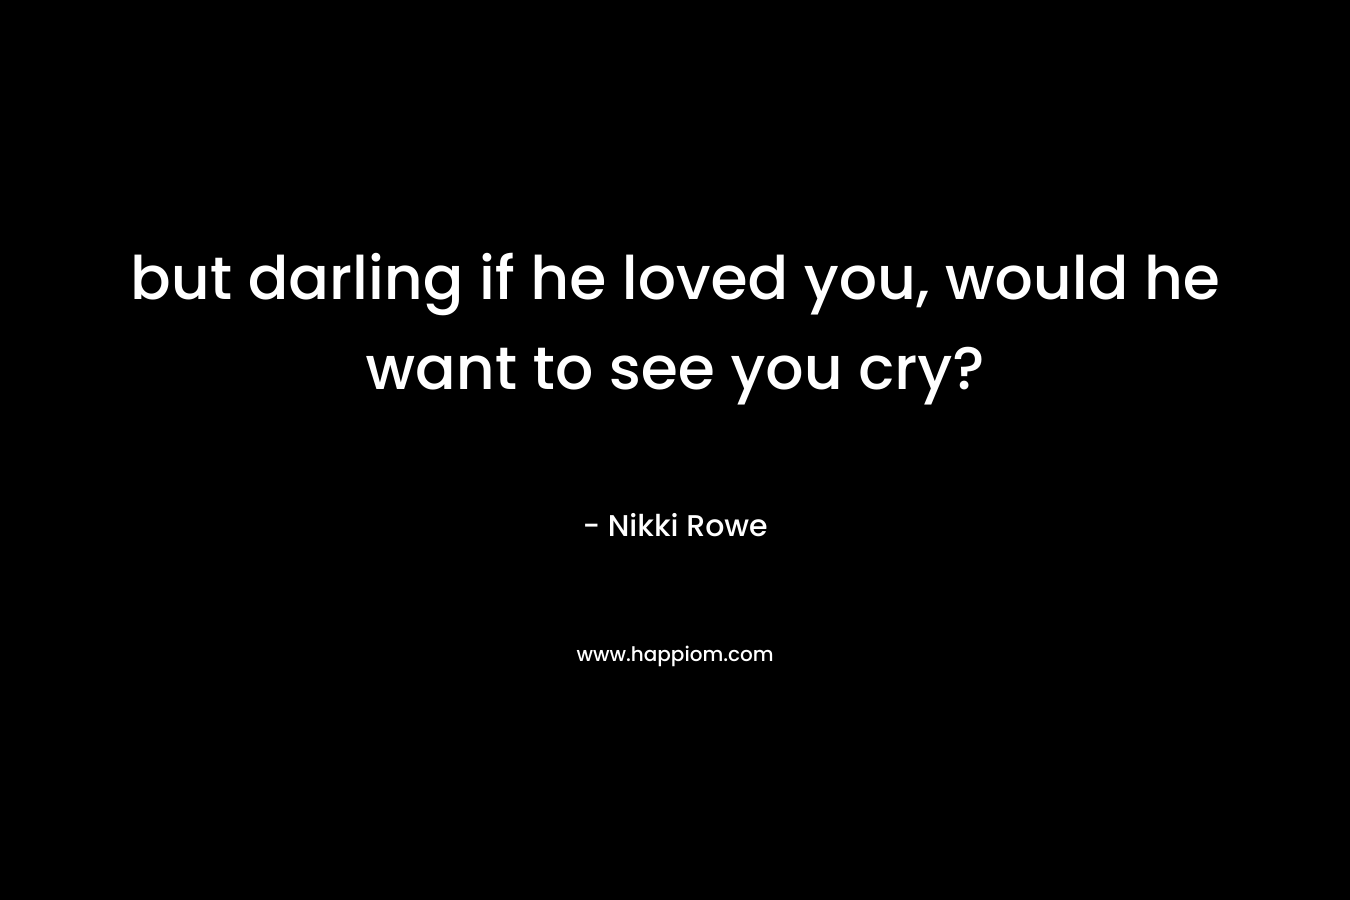 but darling if he loved you, would he want to see you cry? – Nikki Rowe